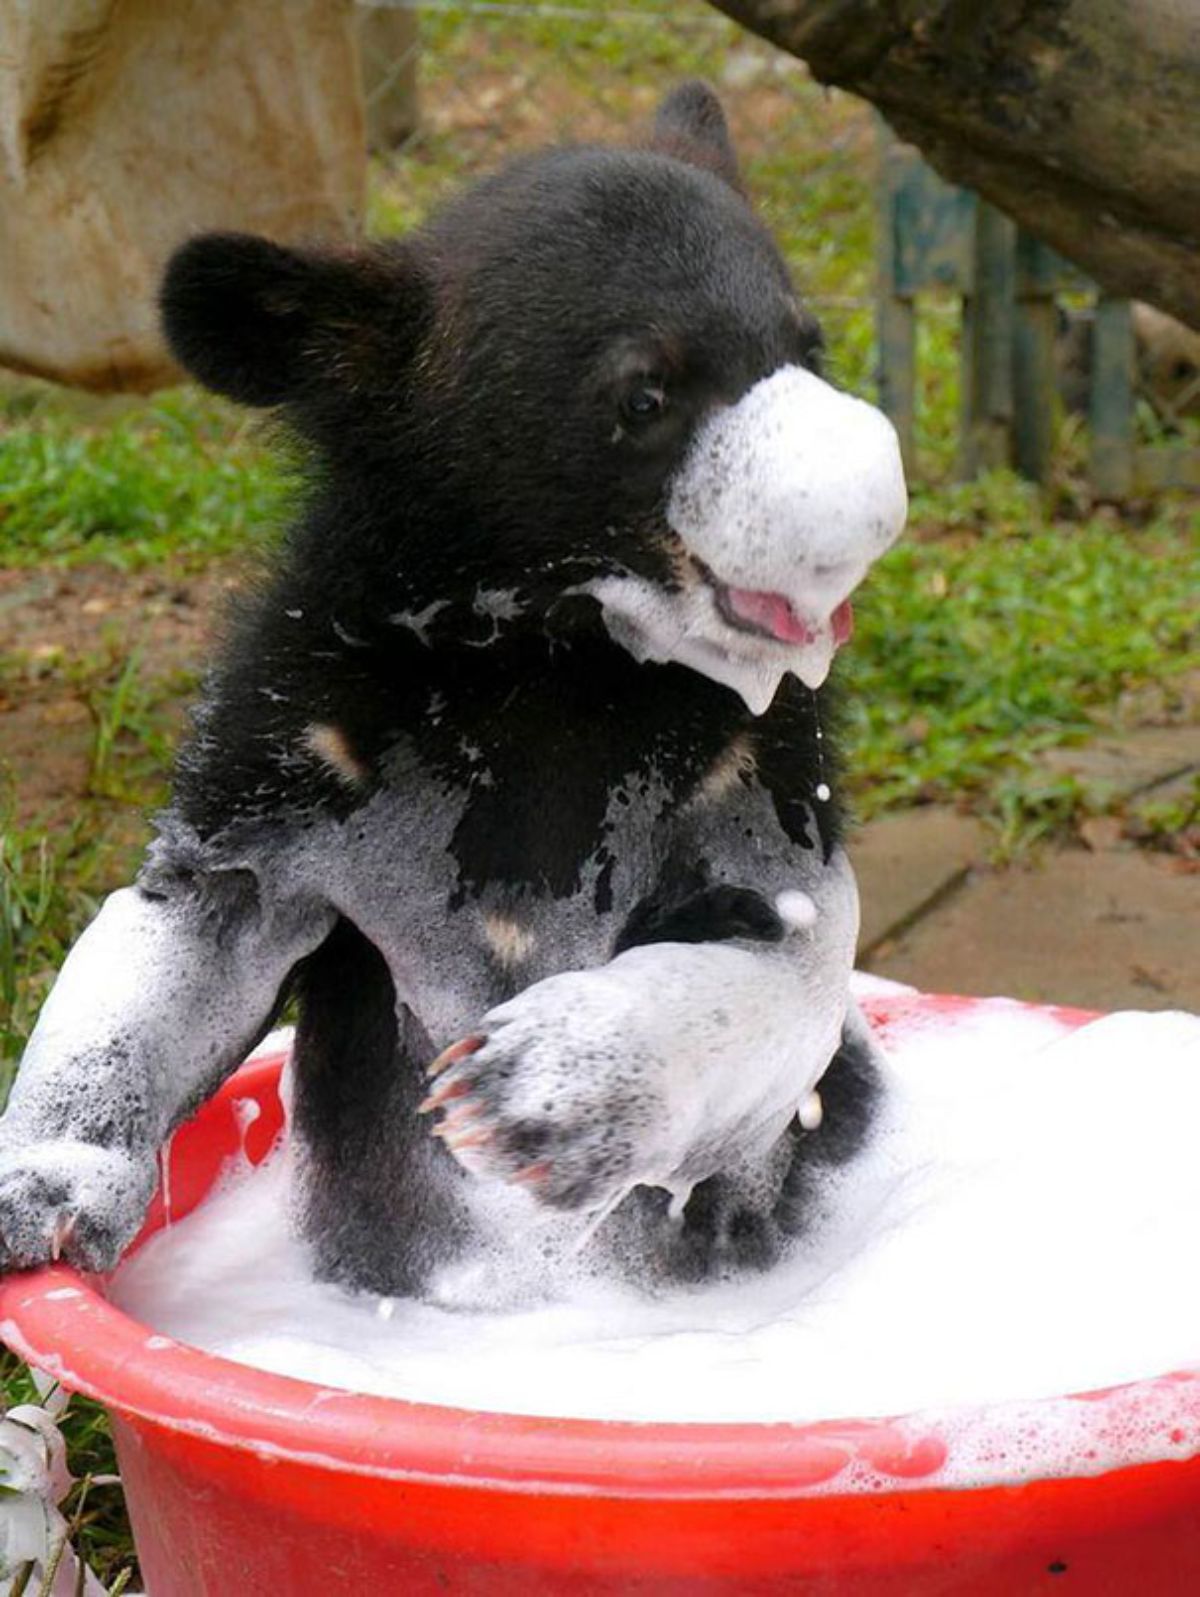 black bear cub in a red tub and covered in soap suds